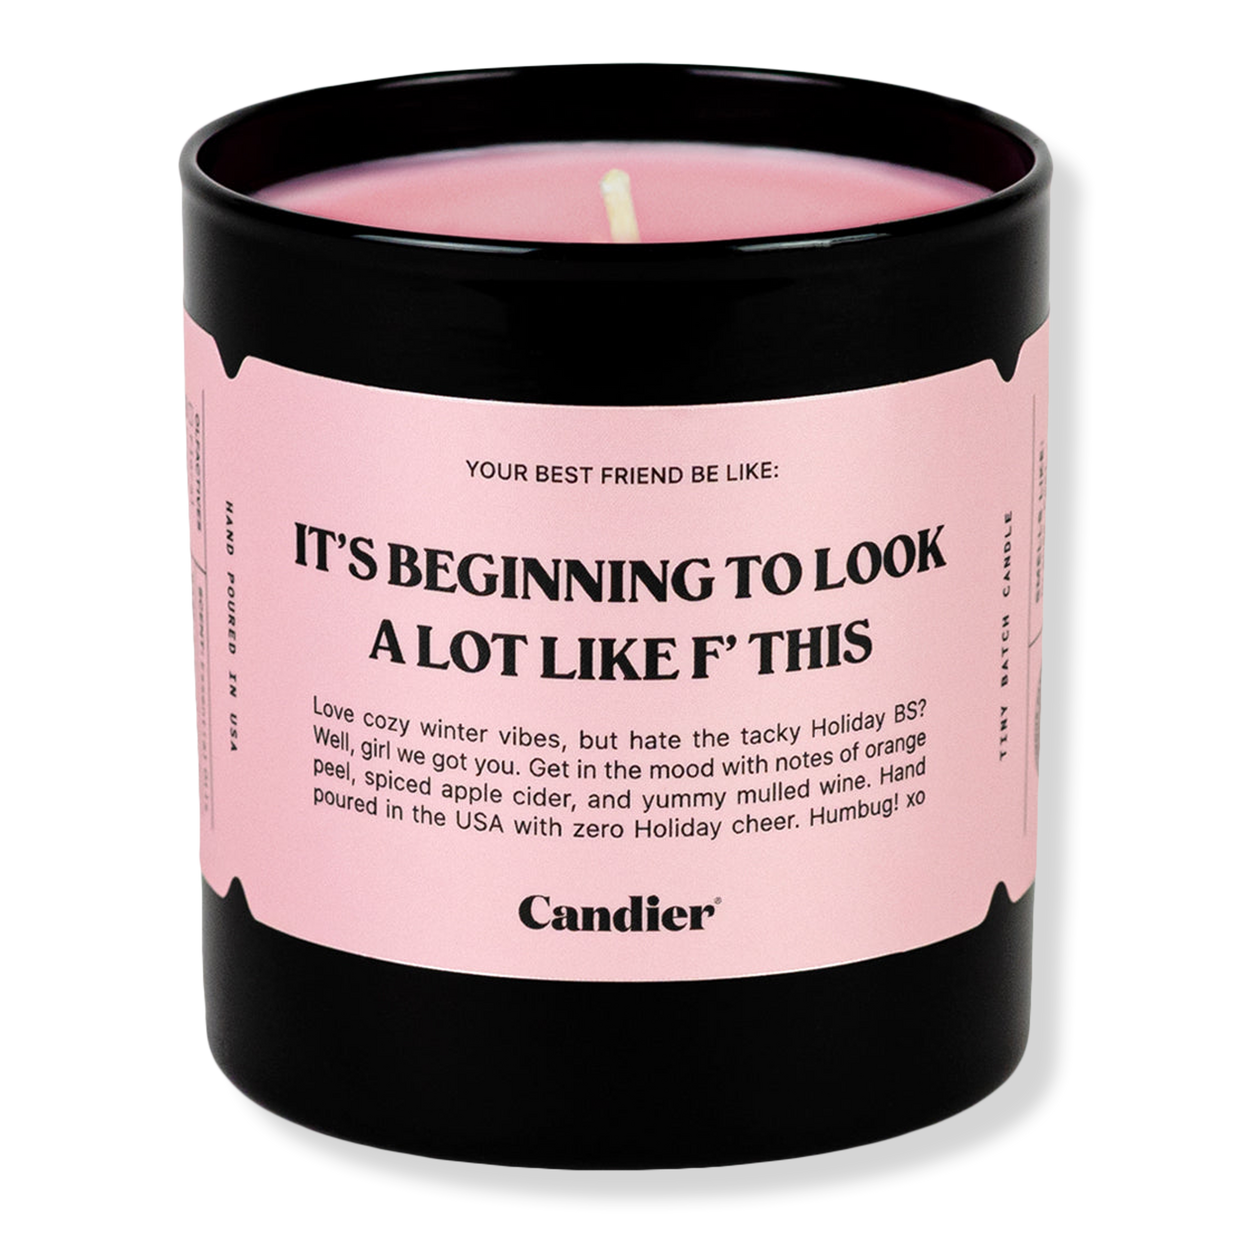 Vacation Candle